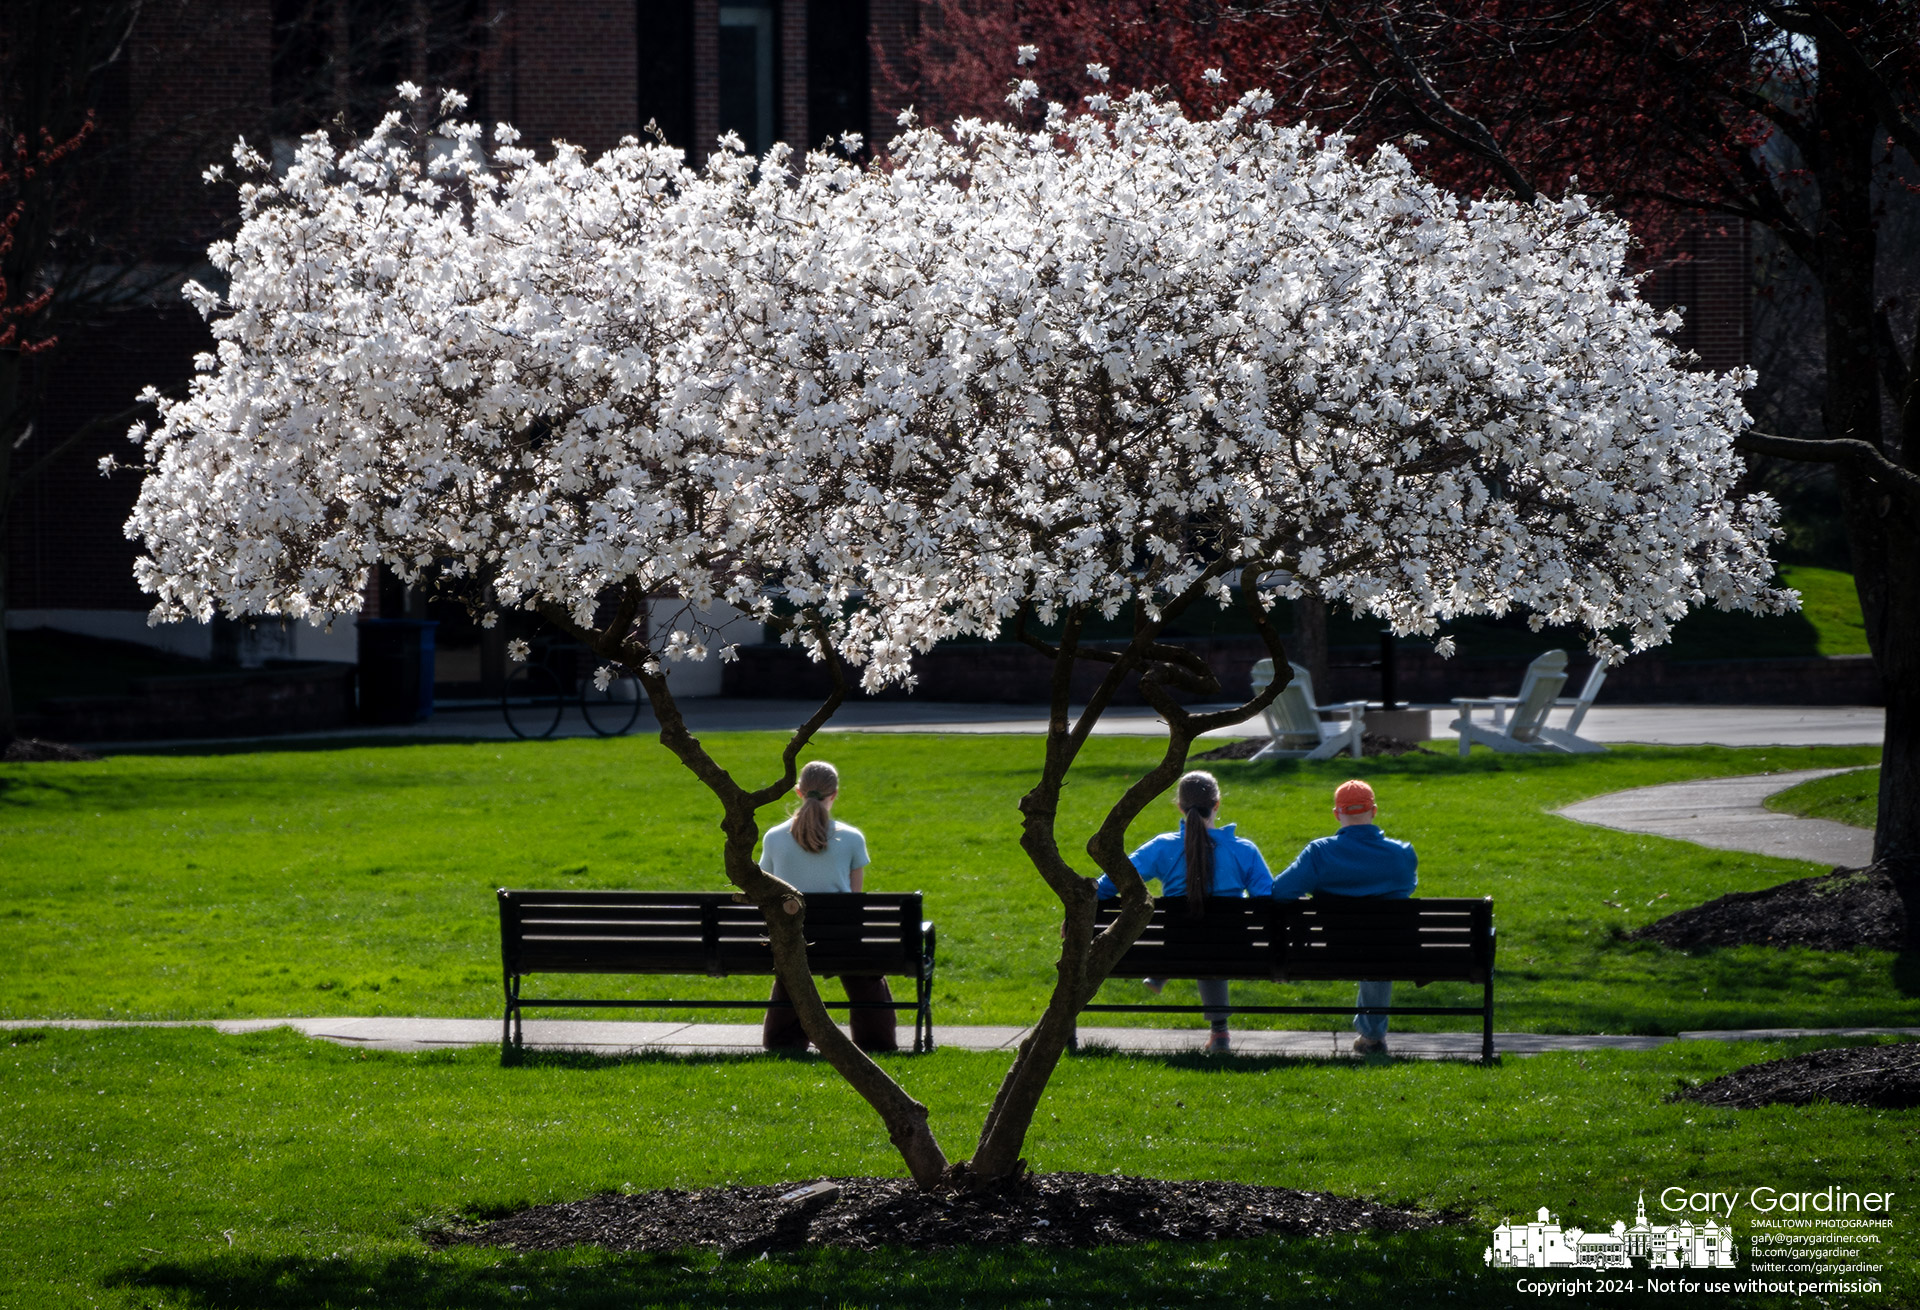 A family out for an afternoon walk takes a break on benches near the Star Magnolias on the plaza behind Towers Hall at Otterbein University. My Final Photo for March 16, 2024.